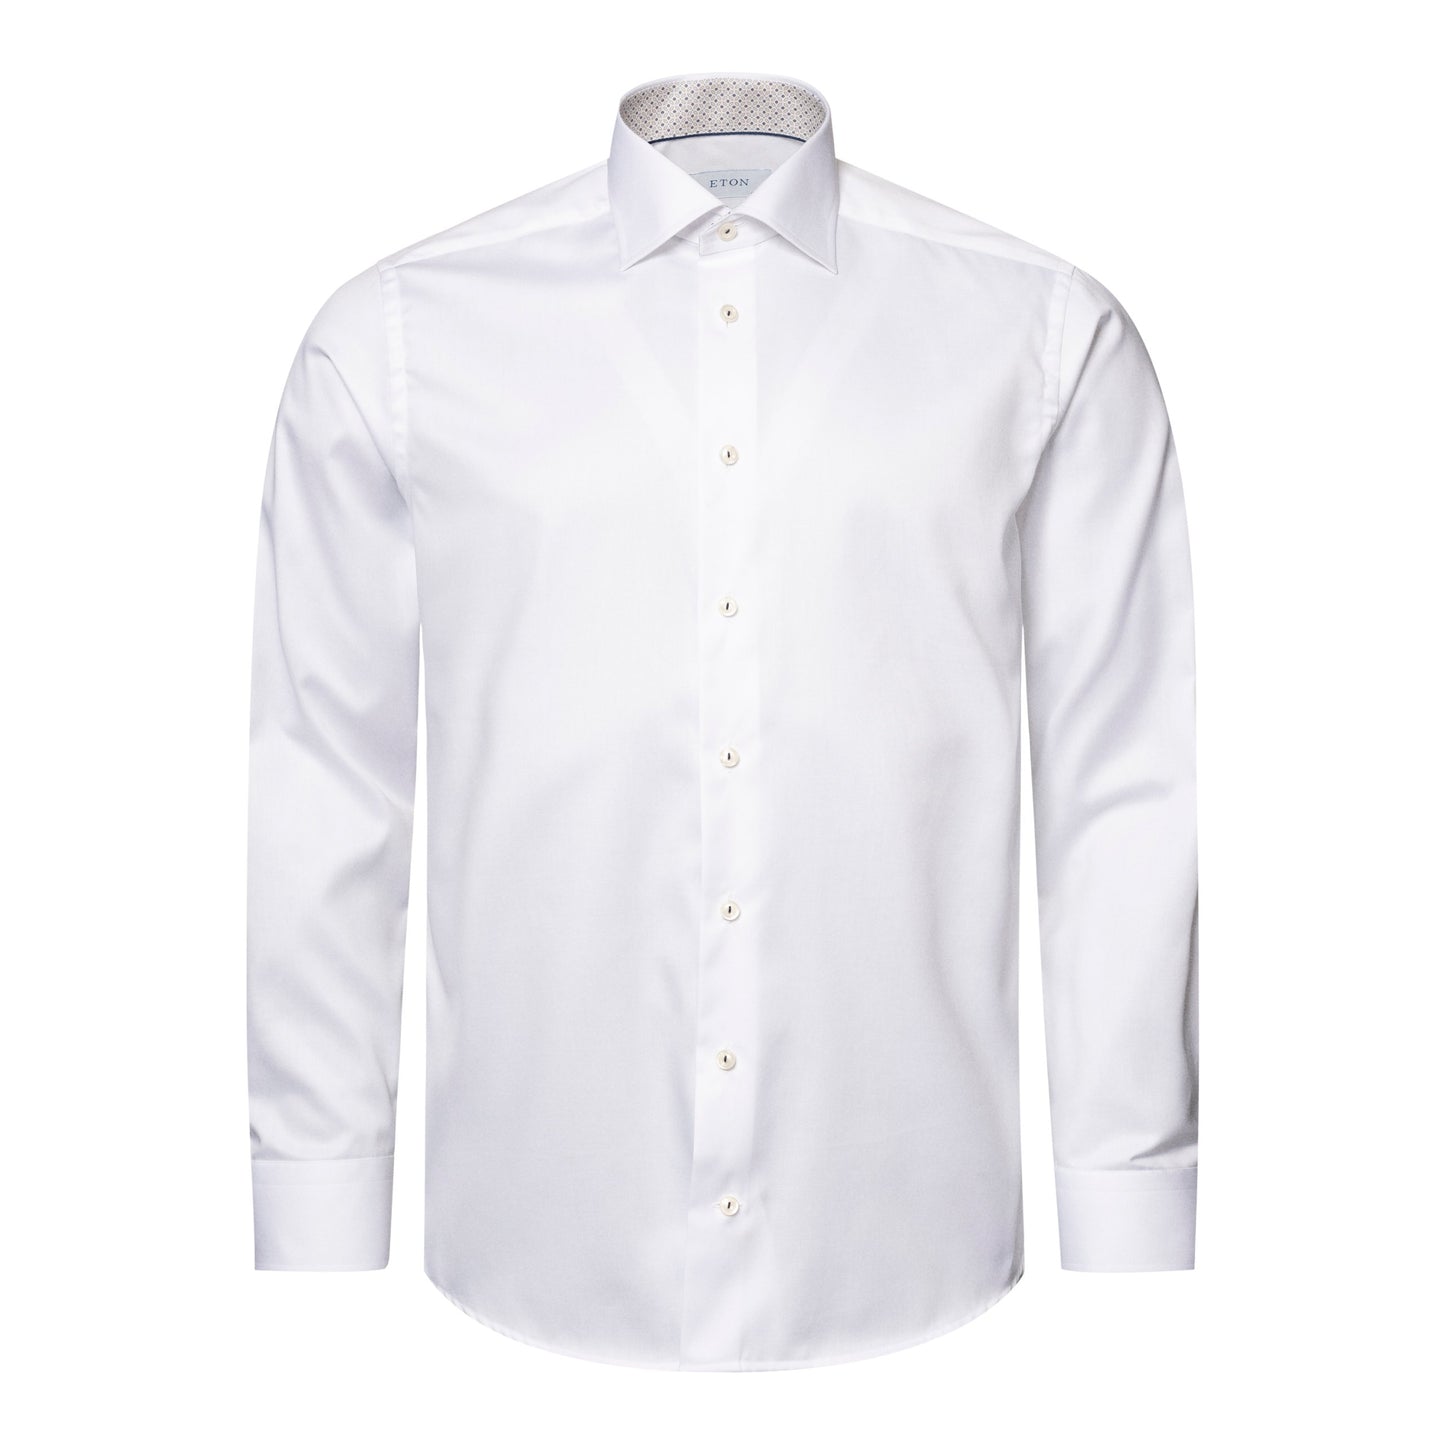 ETON Signature Twill Contemporary Fit Shirt in White with Floral Contrast Details 10001046000